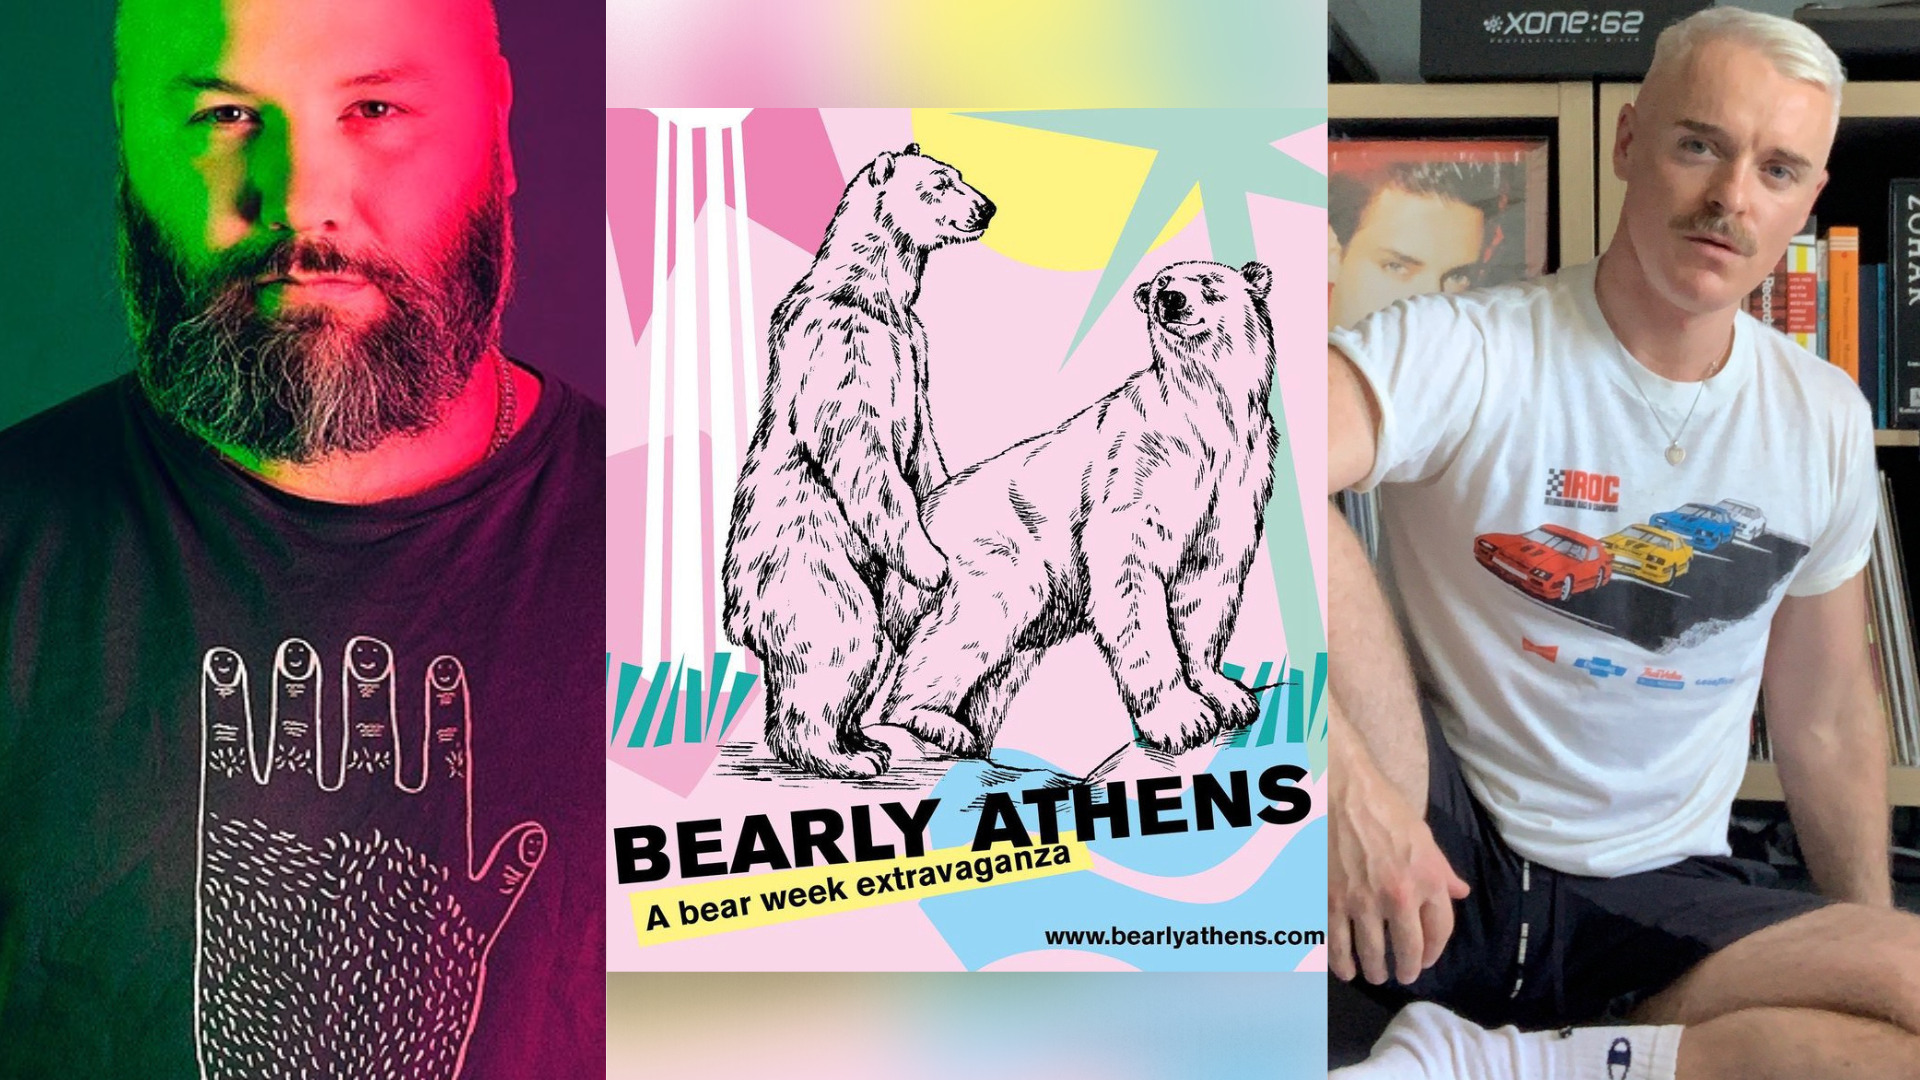 Are You Ready for the First Bearly Athens?